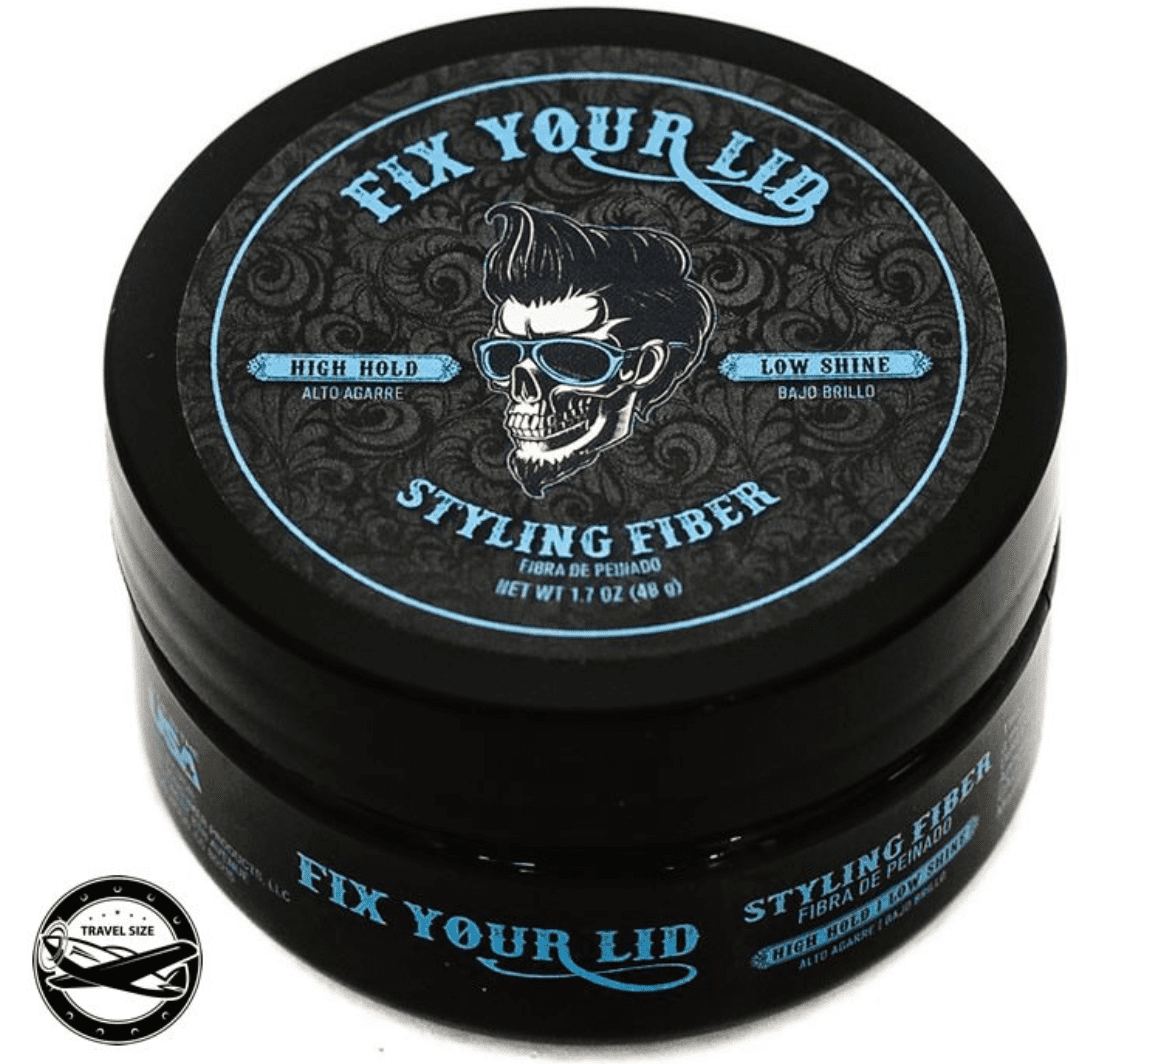 How to get a high volume quiff using fix your lid fiber and